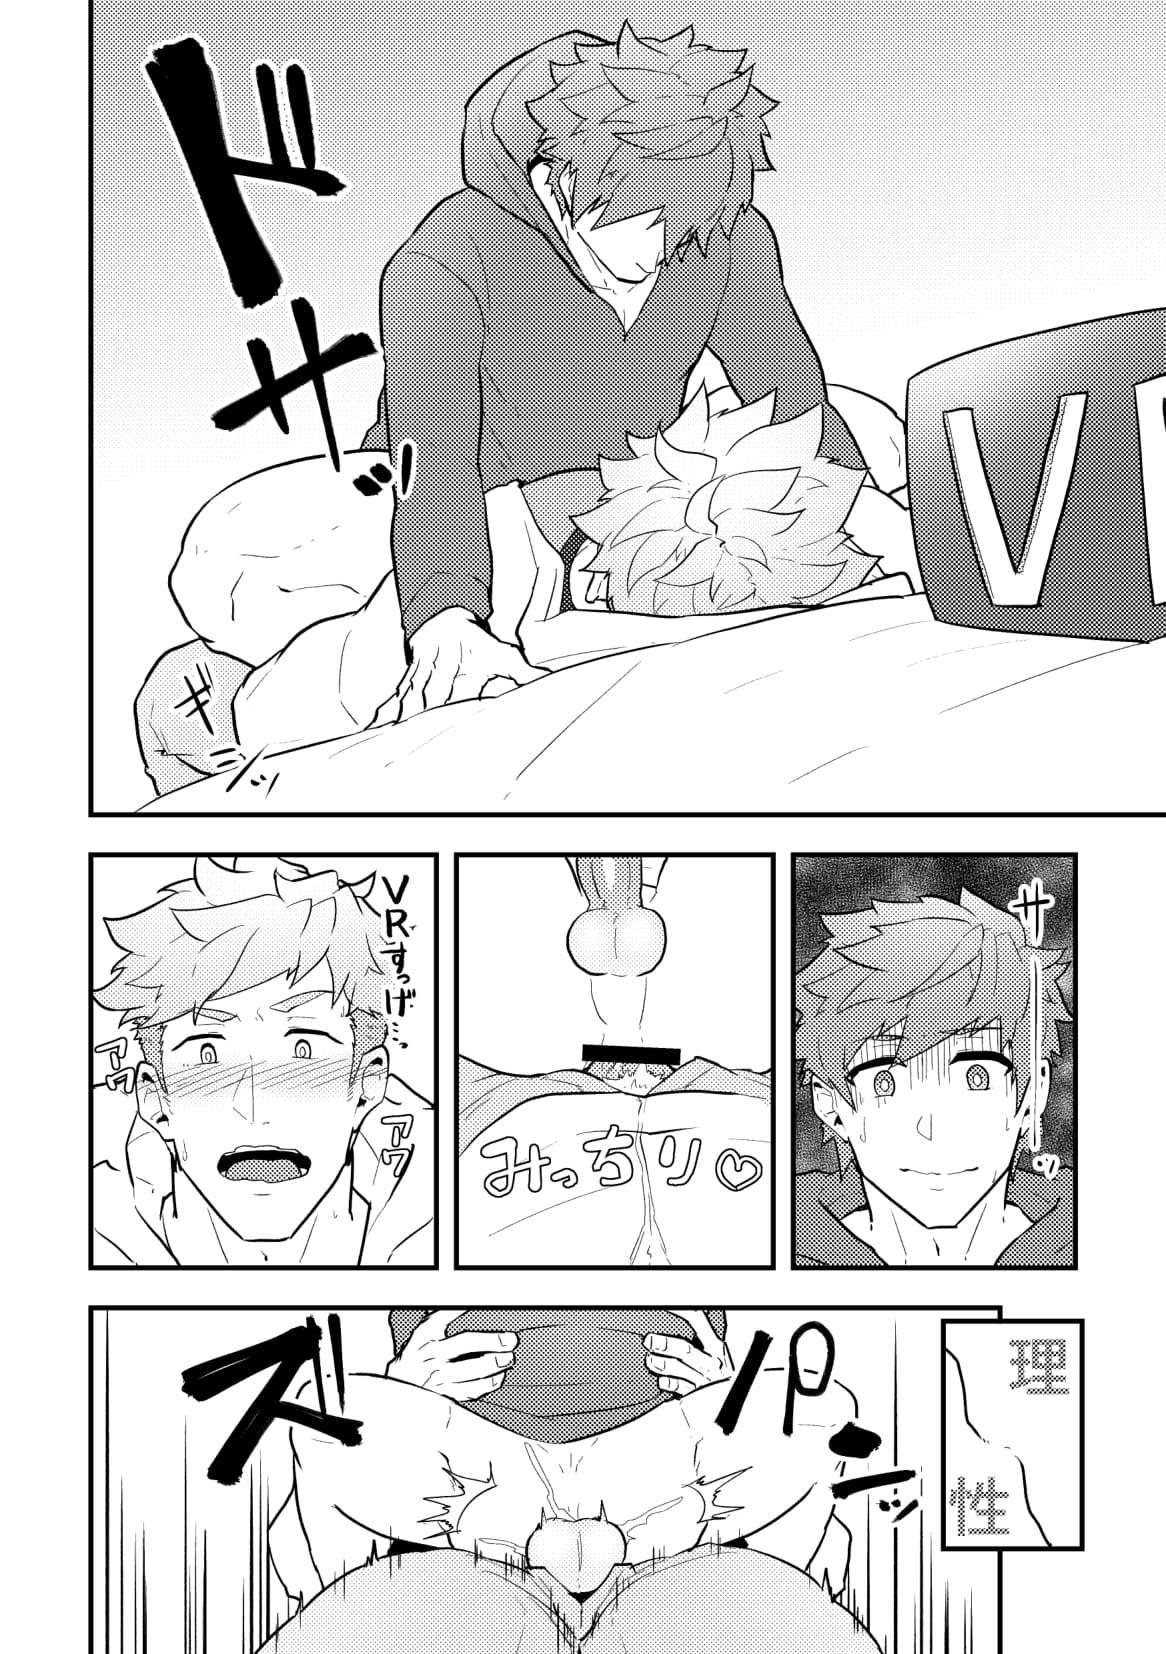 Massages Onabe Hon C95 - The idolmaster Fate grand order Granblue fantasy Pokemon Fire emblem Castlevania Dragalia lost Punch-out Anal Fuck - Page 4